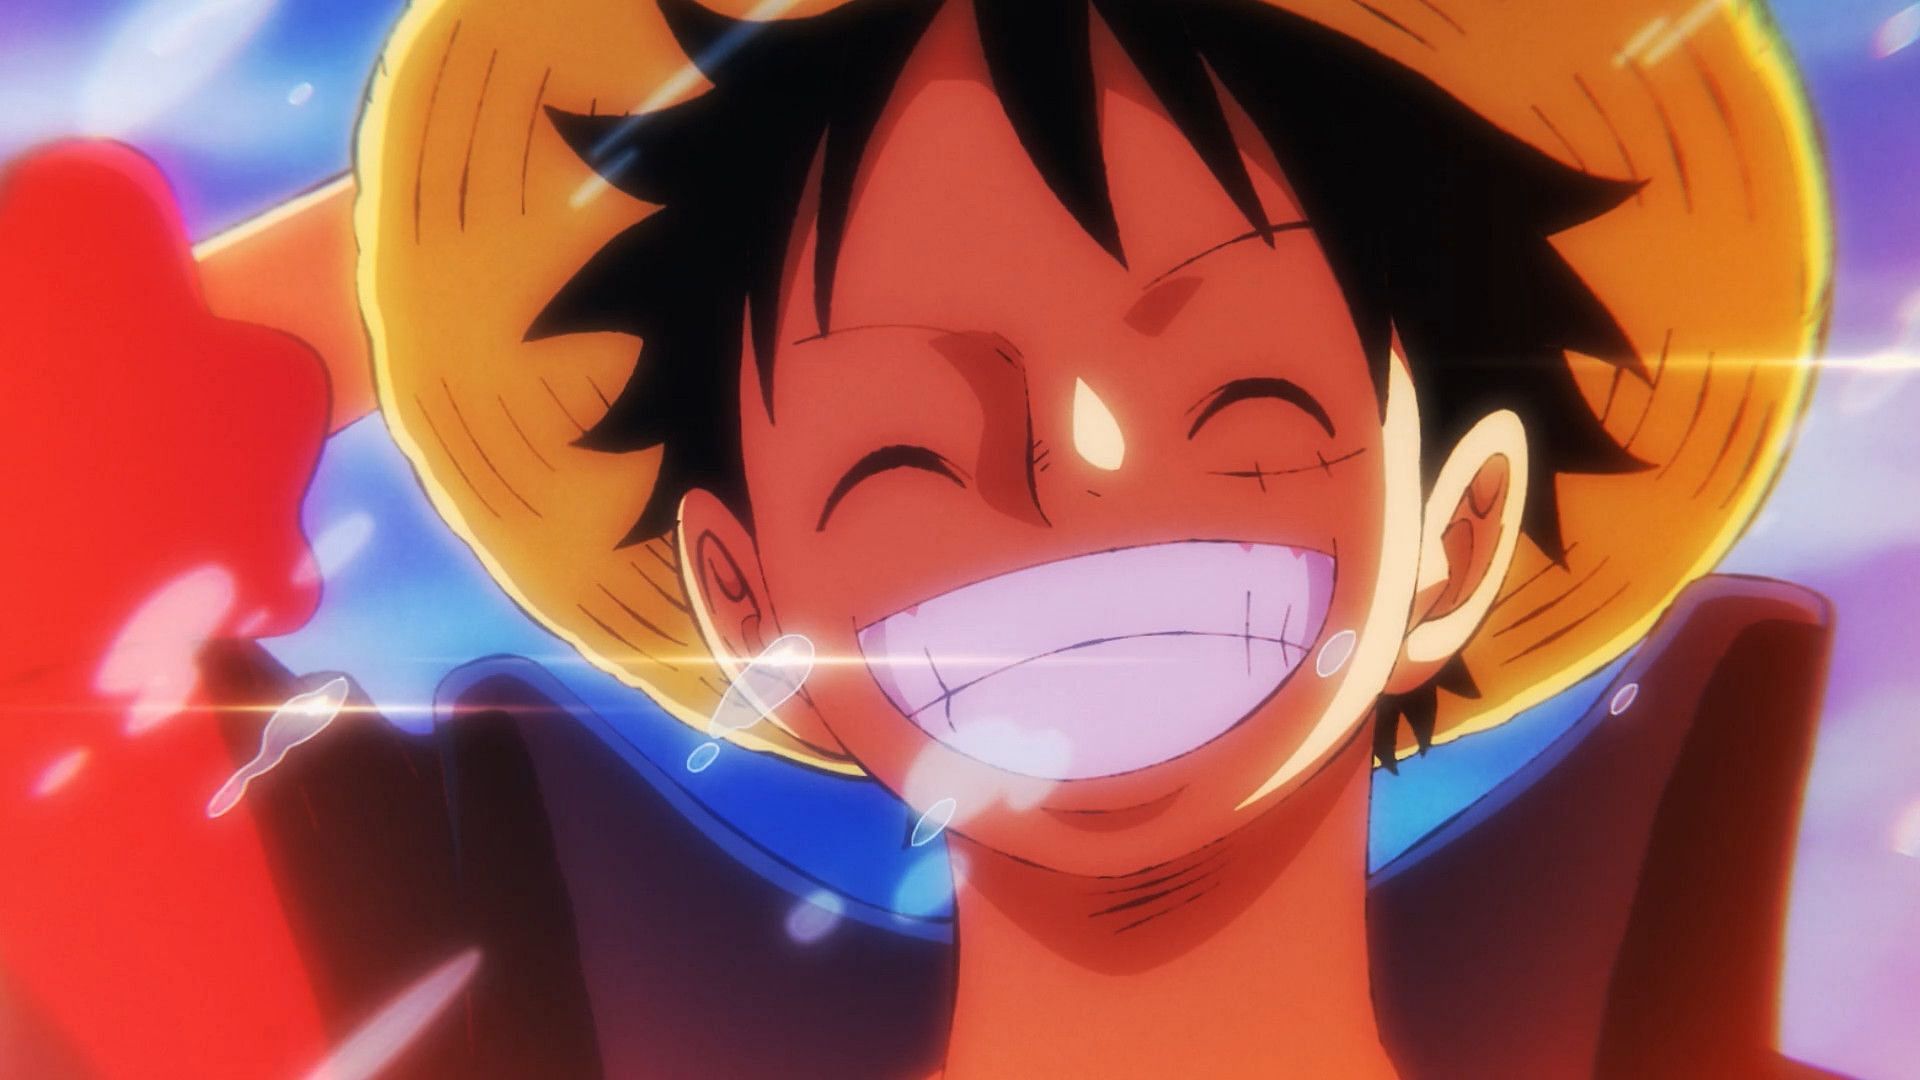 Luffy&#039;s trademark laugh and smile are a key motif in One Piece Chapter 1044 (Image Credits: Eiichiro Oda/Shueisha, Viz Media, One Piece)